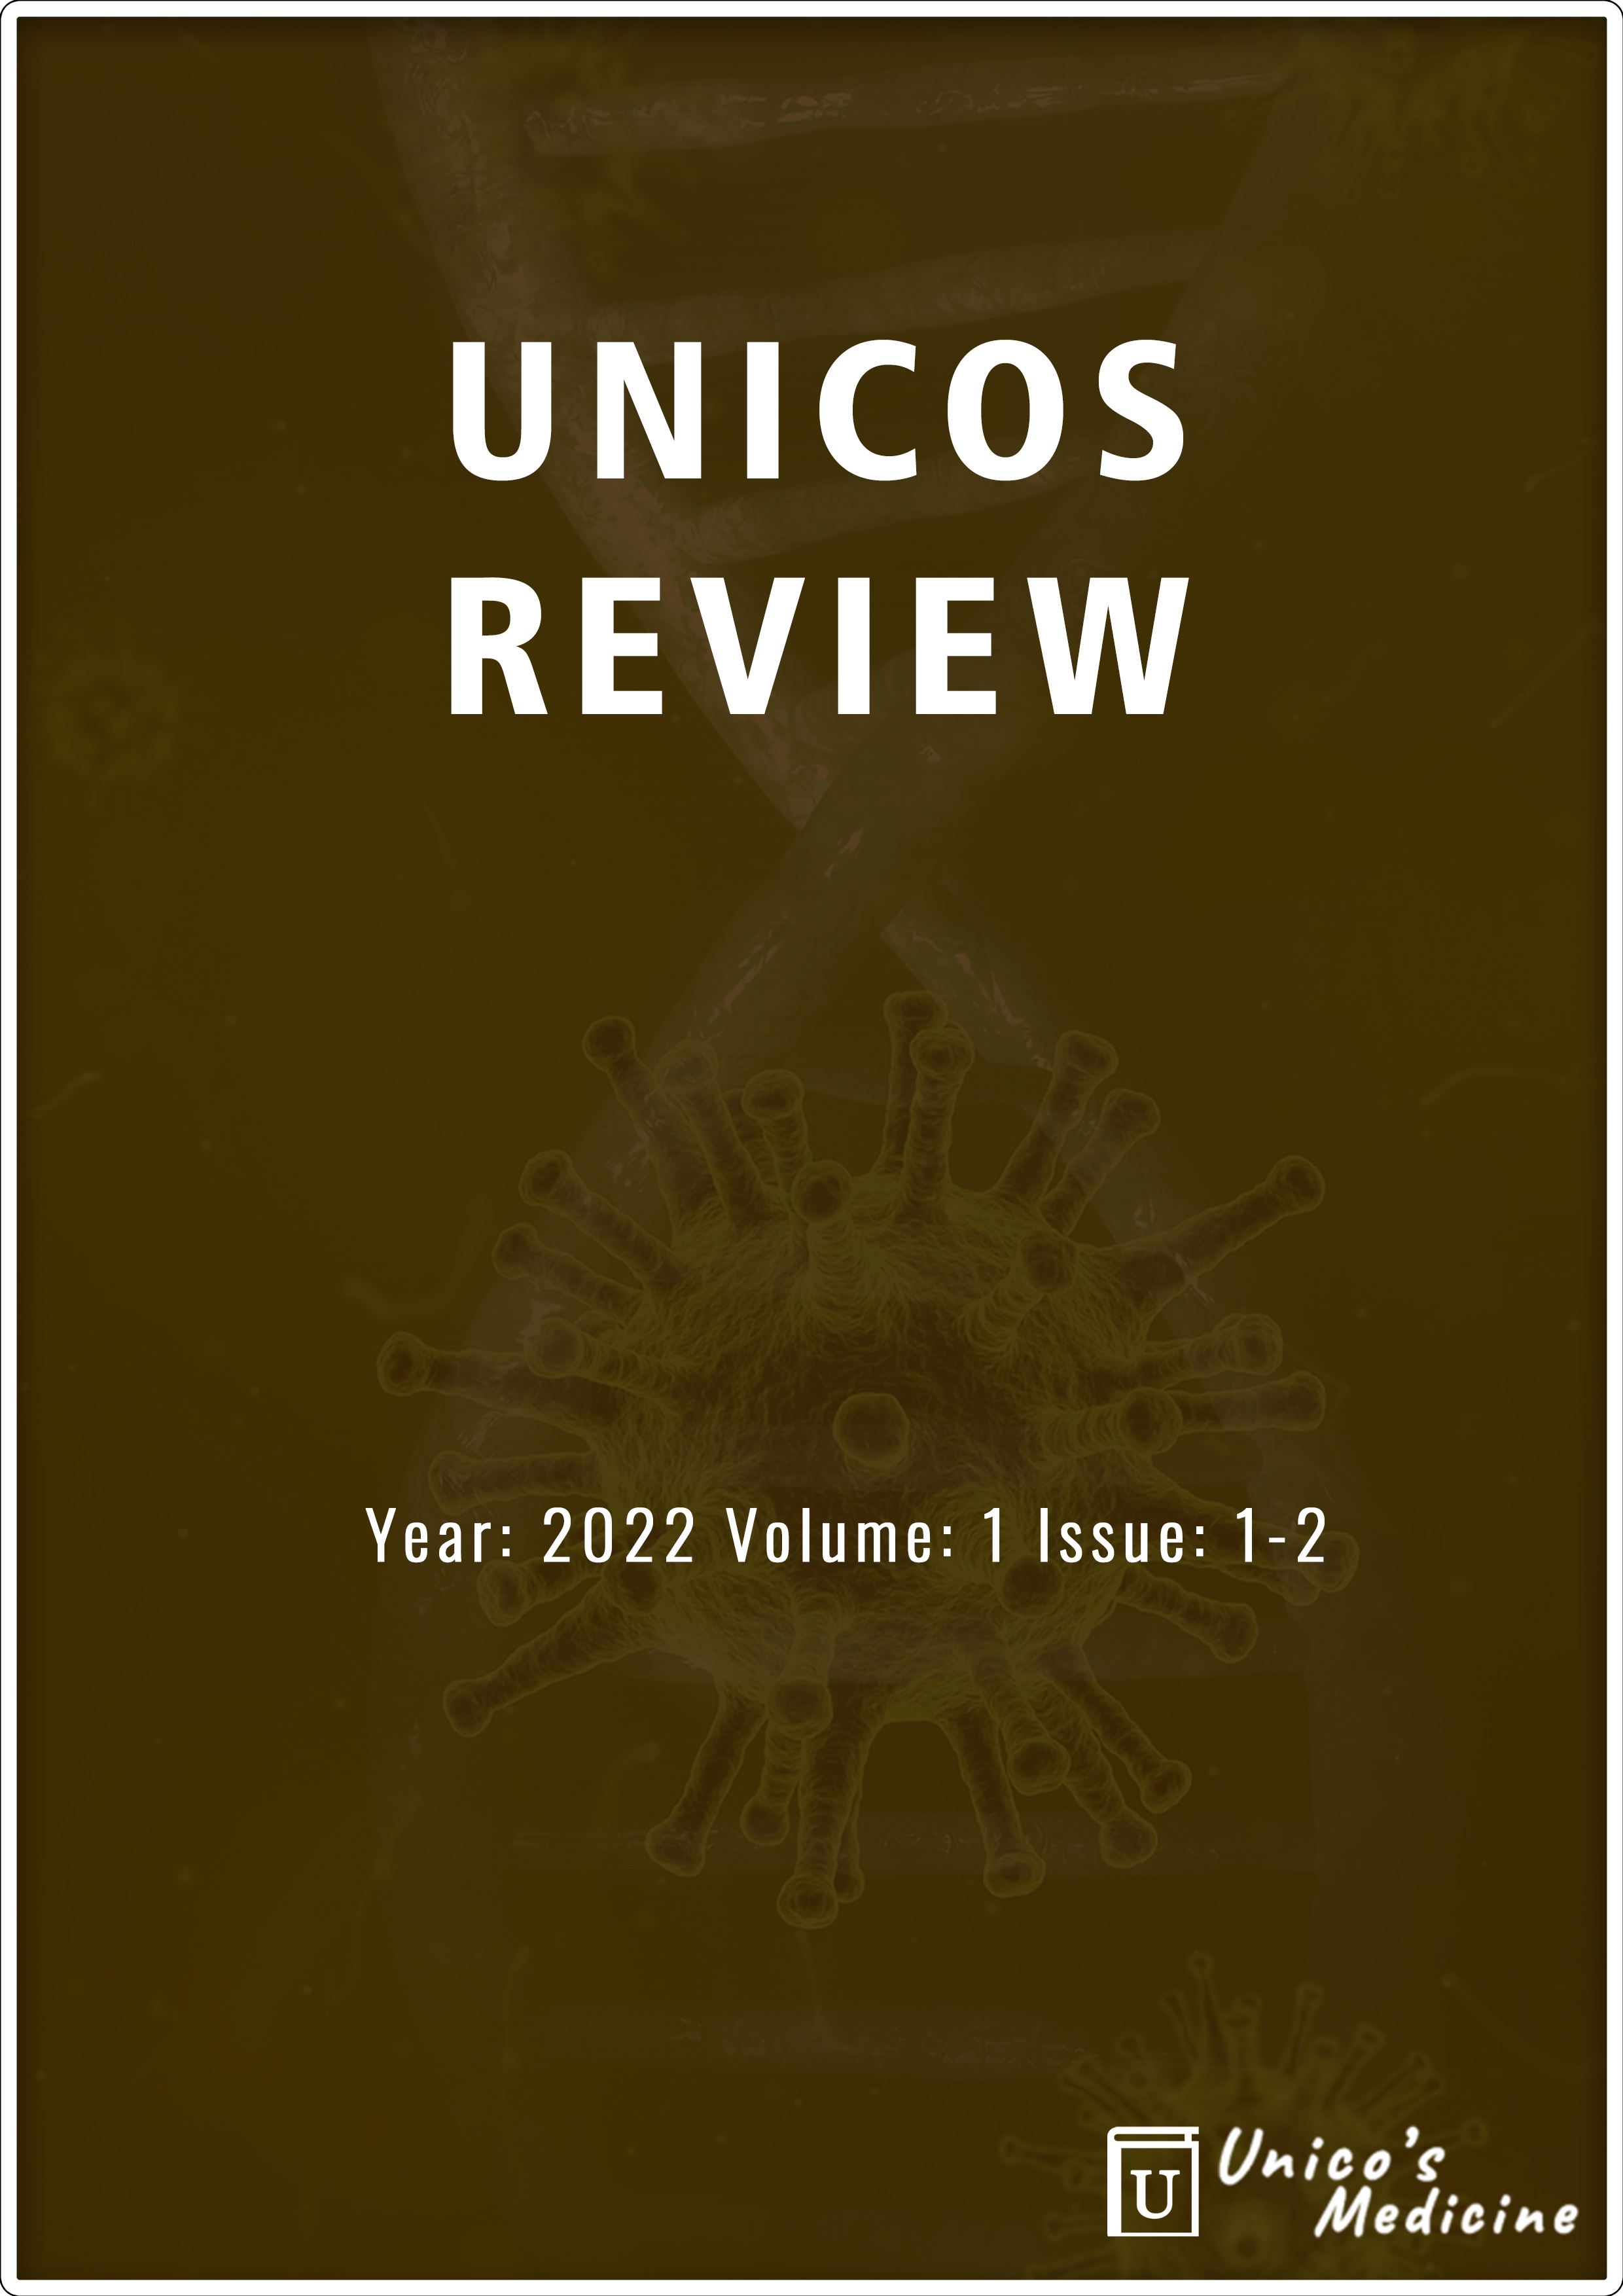 					View Vol. 1 No. 1-2 August-December (2022): Unico's Review
				